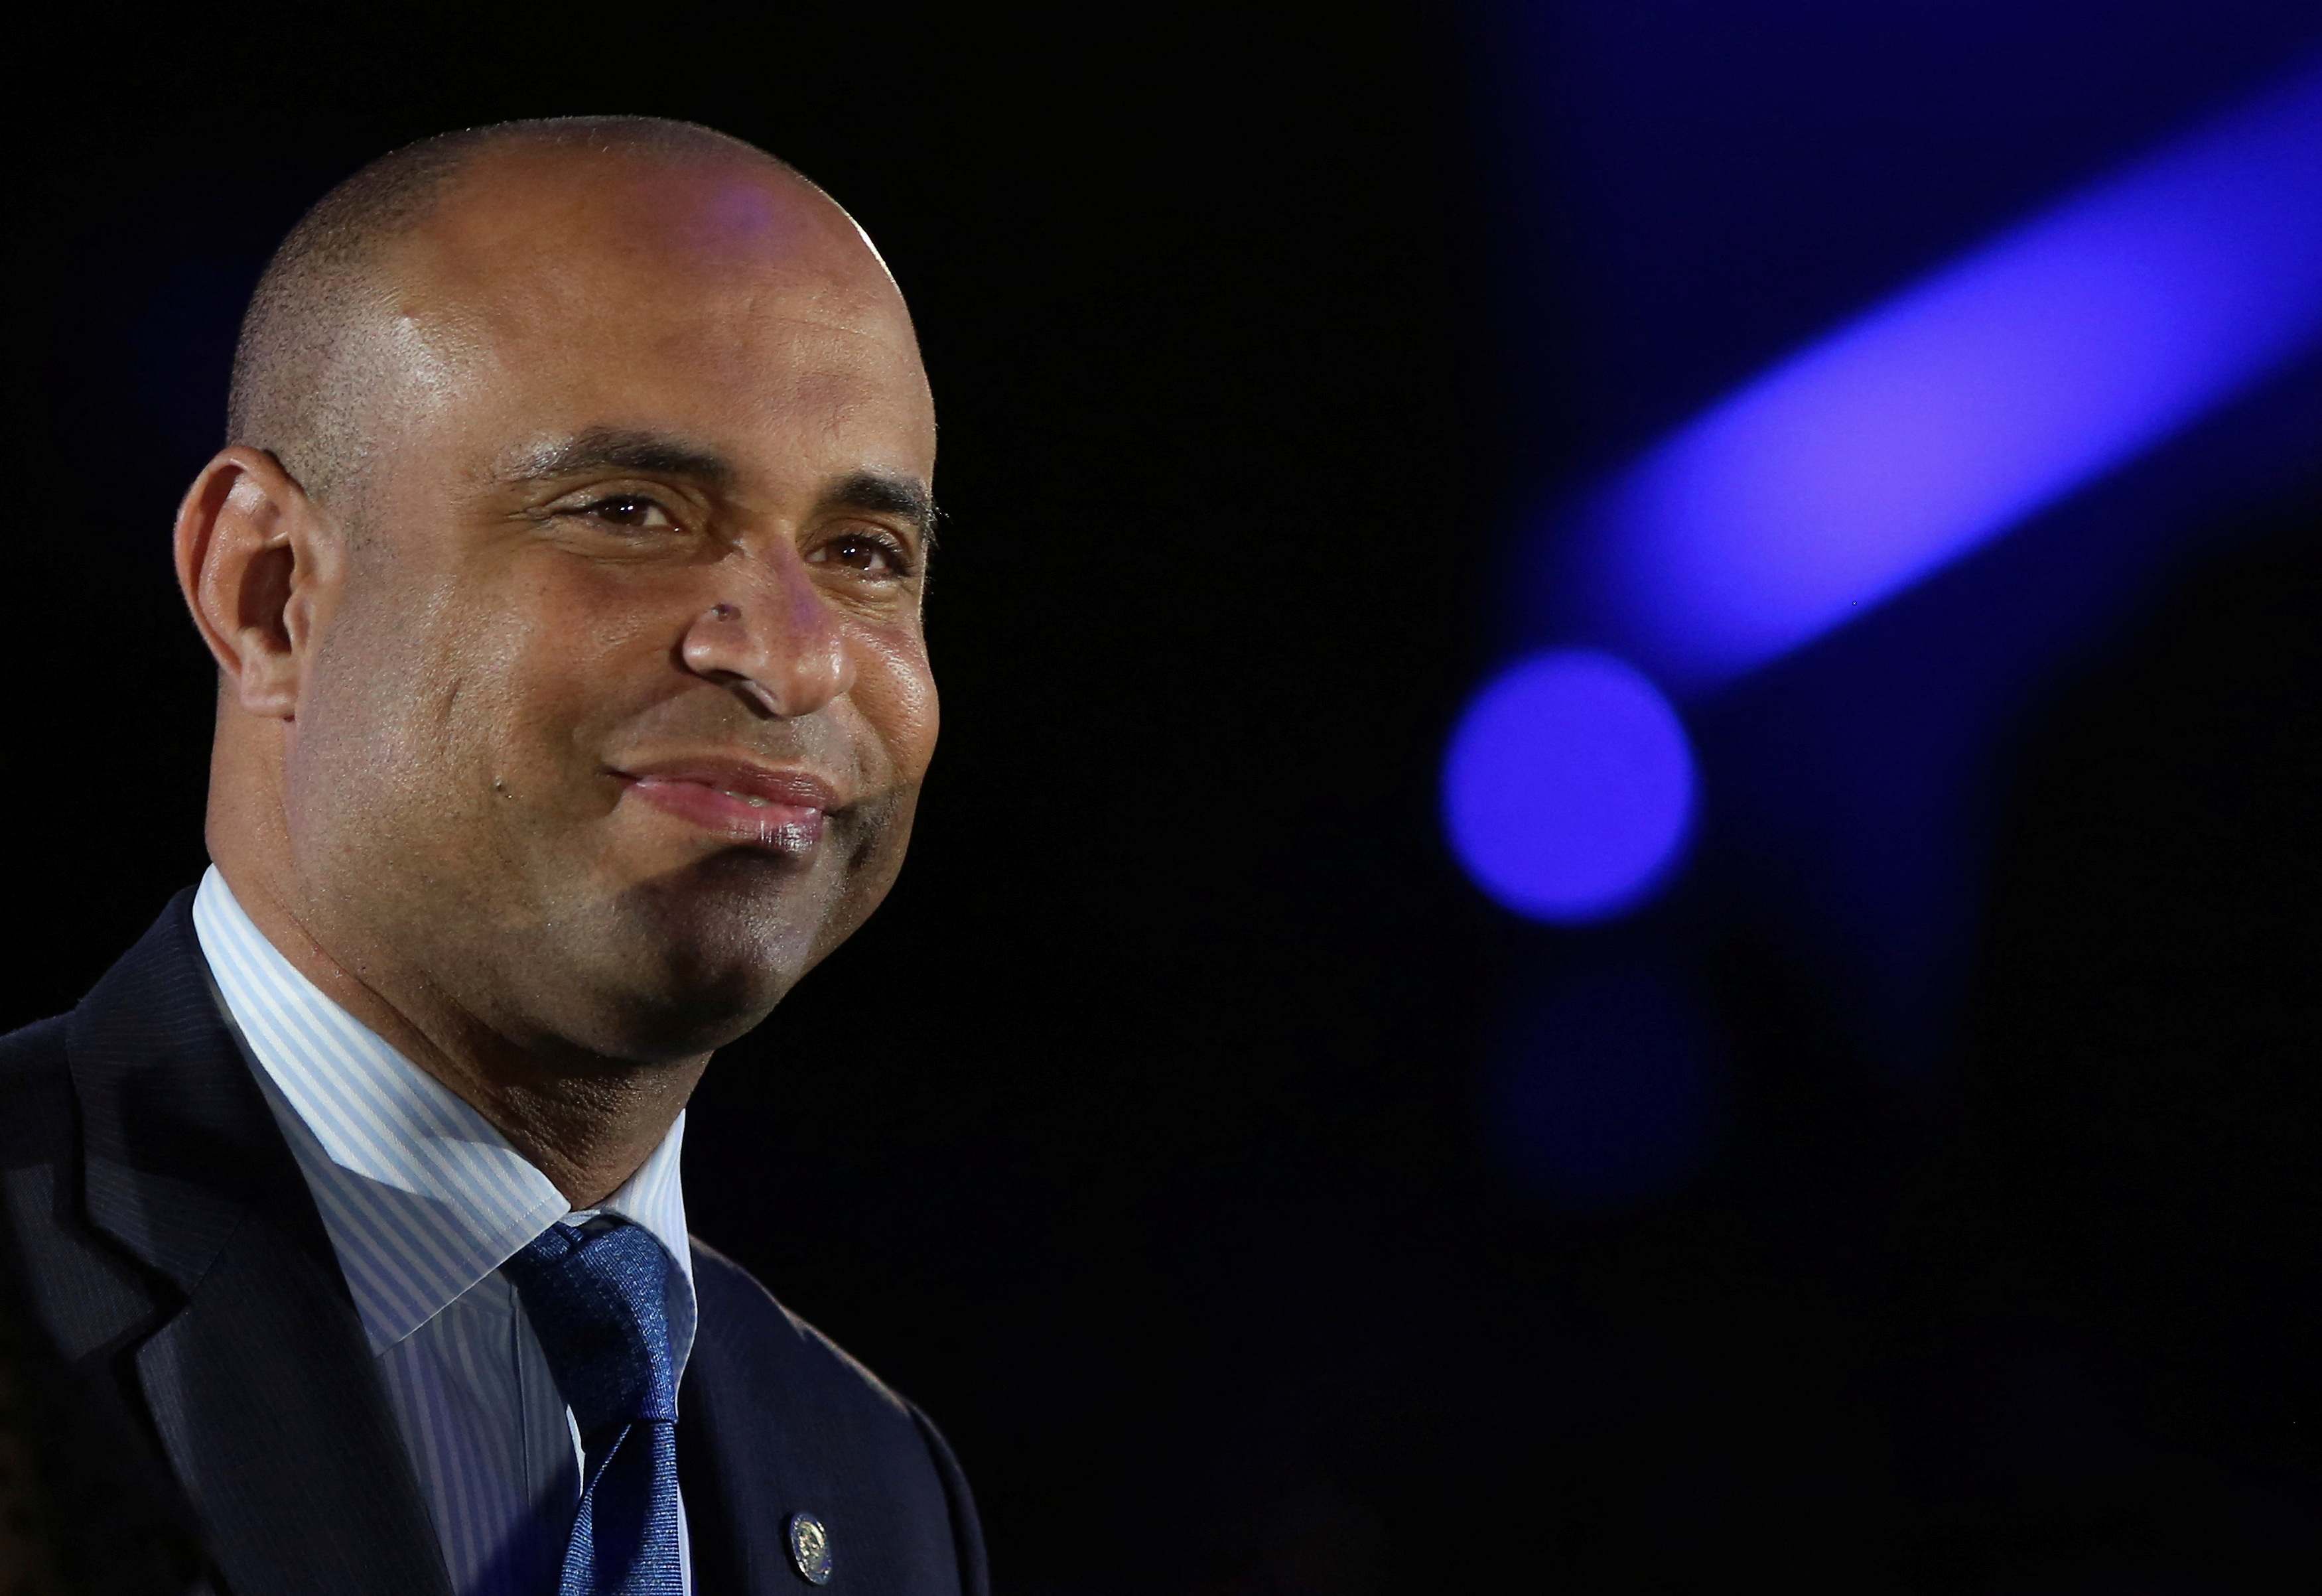 Haiti's PM Lamothe looks on at a Salesforce.com Dreamforce event in San Francisco